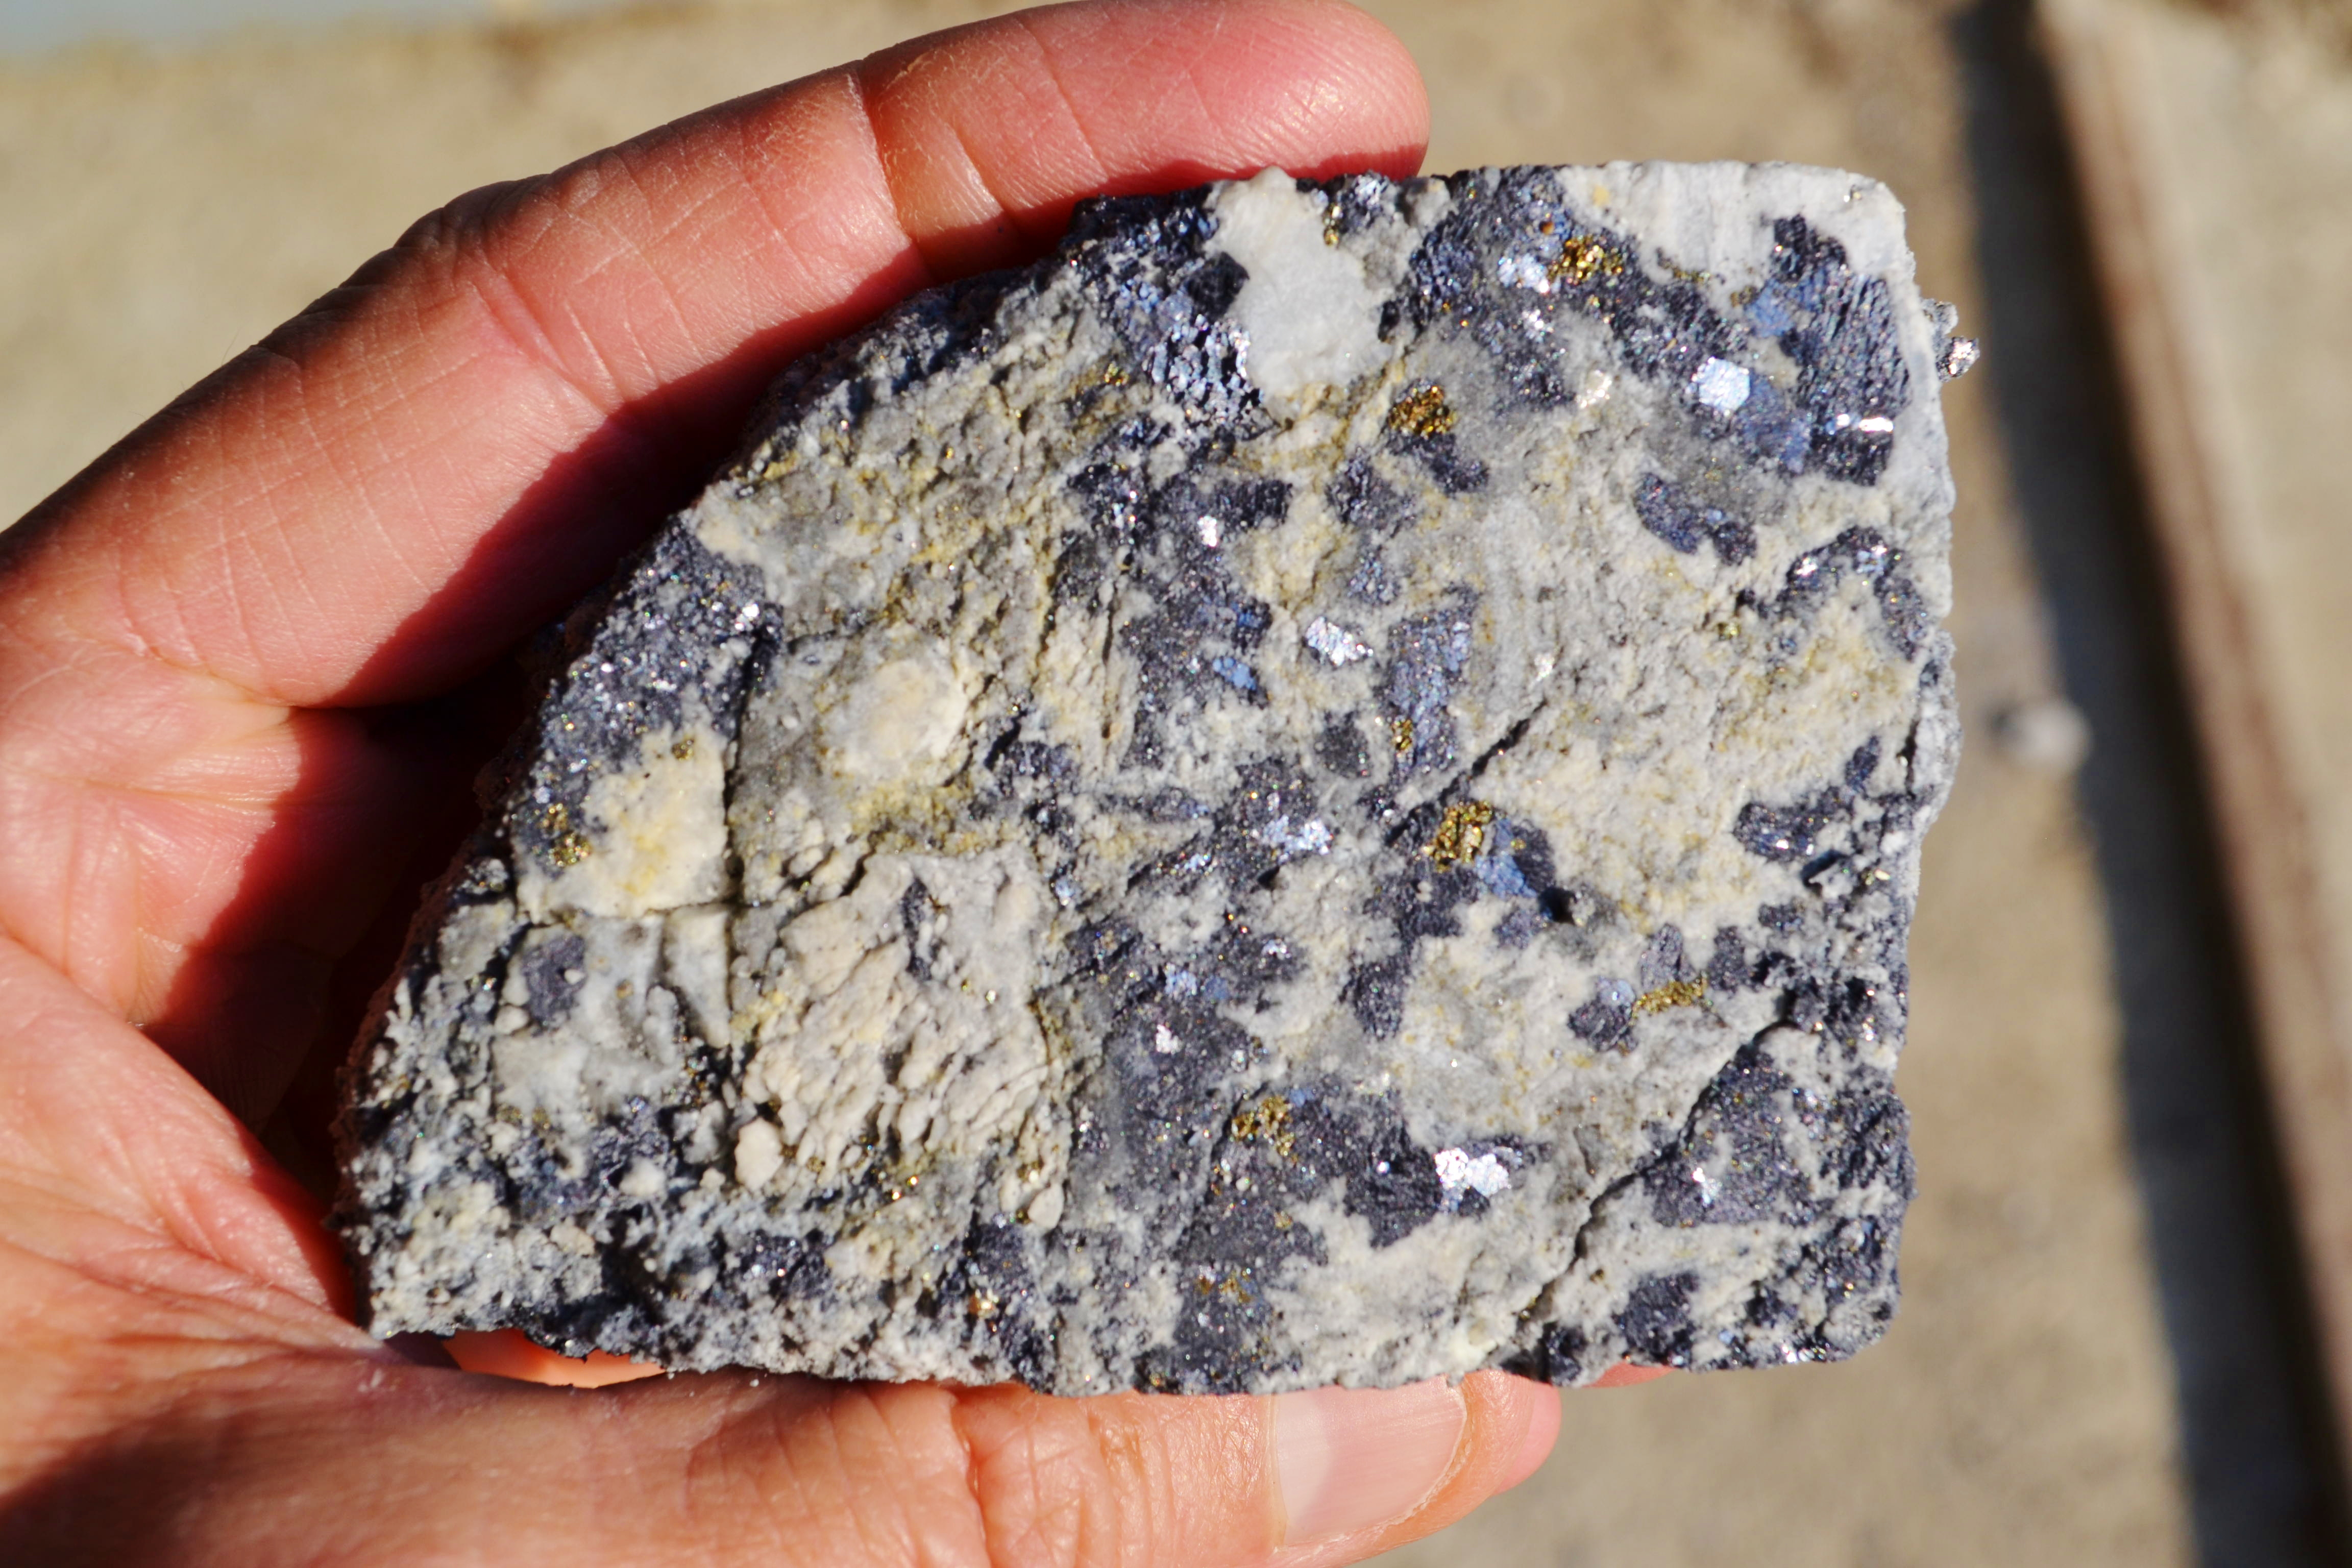 Lead-zinc-silver mineralized core sample from Balya.